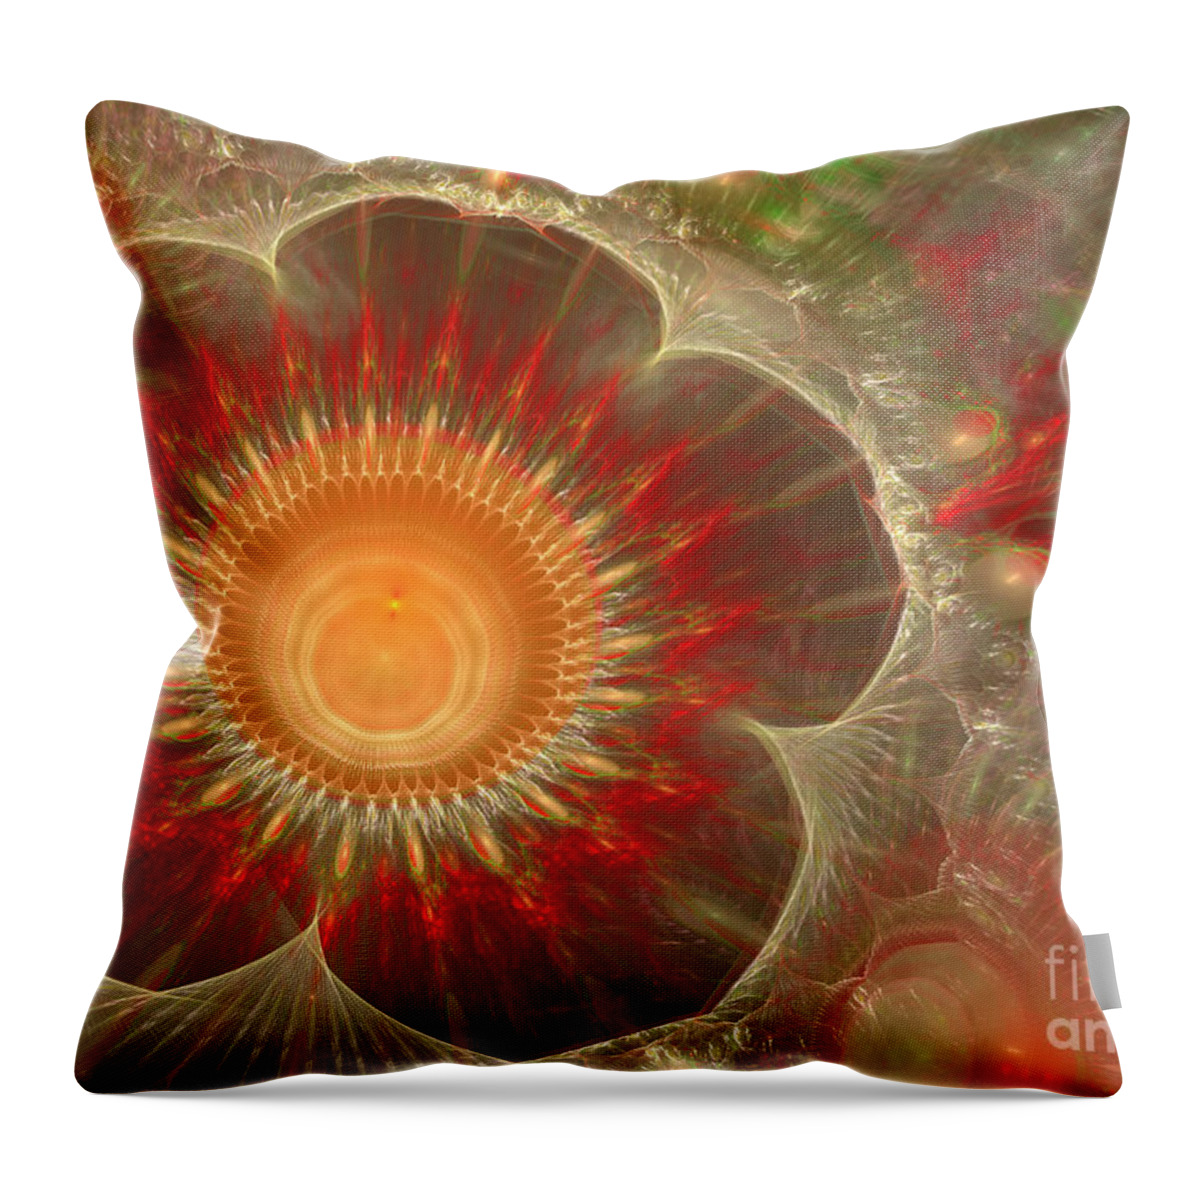 Abstract Throw Pillow featuring the digital art Spring flower by Martin Capek